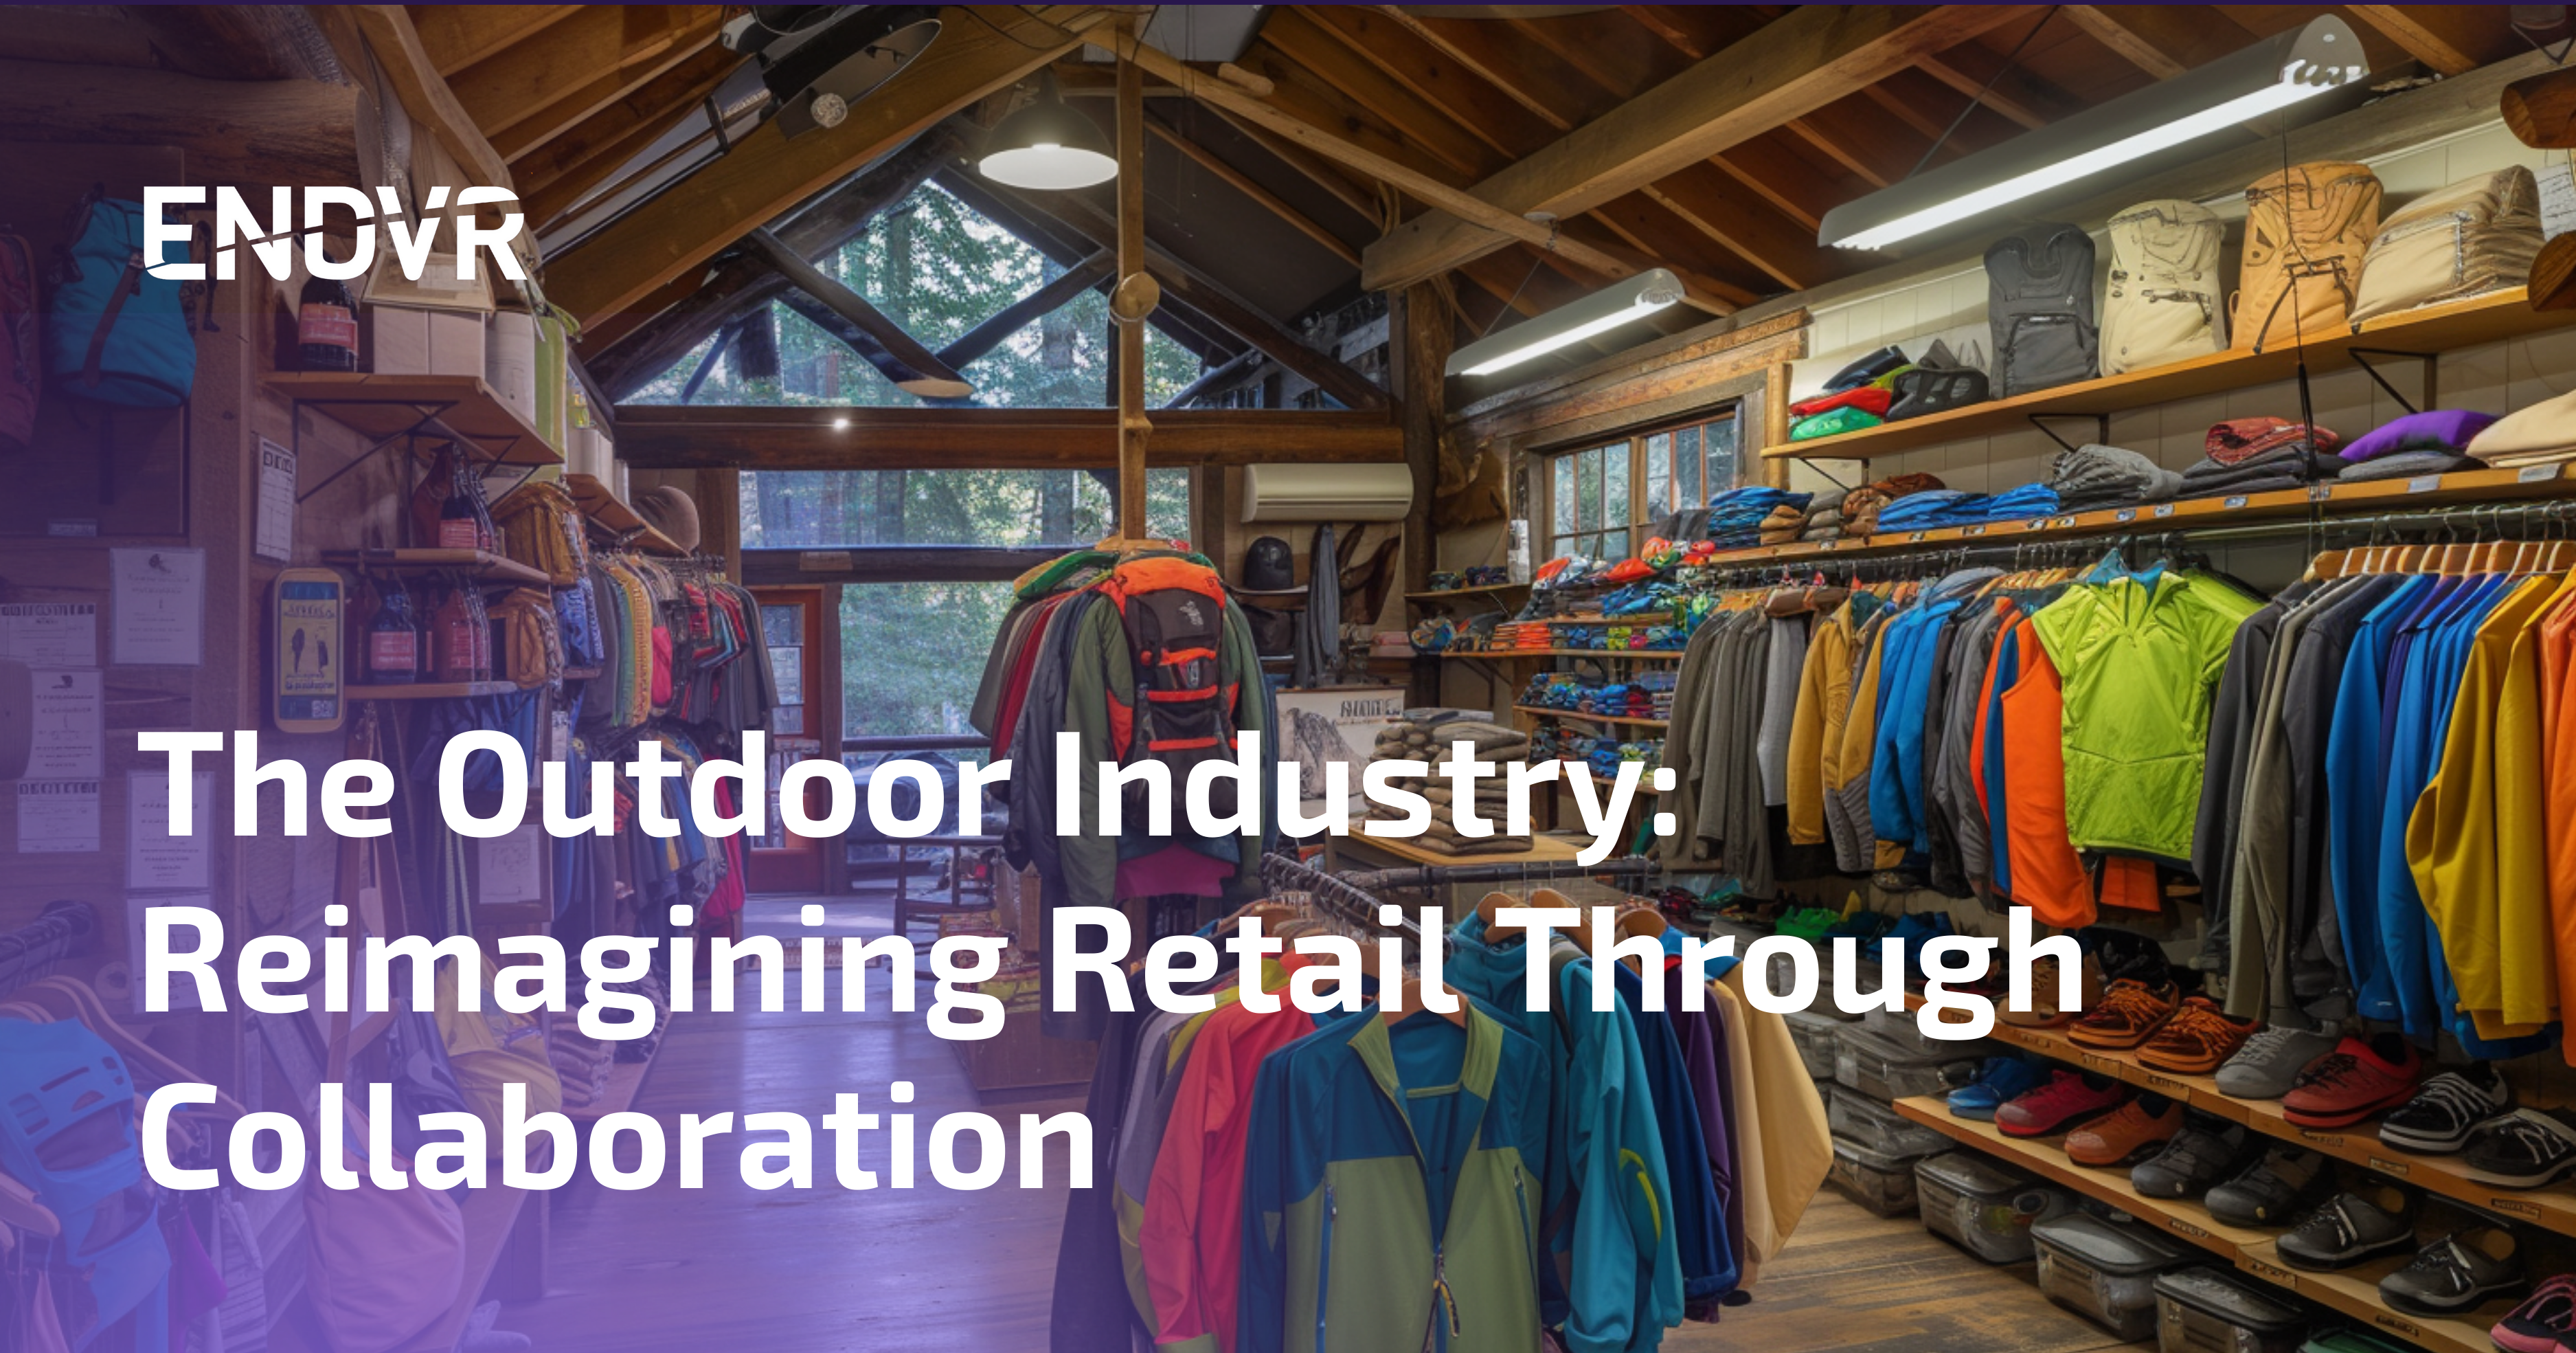 The outdoor industry: remerging retail through collaboration